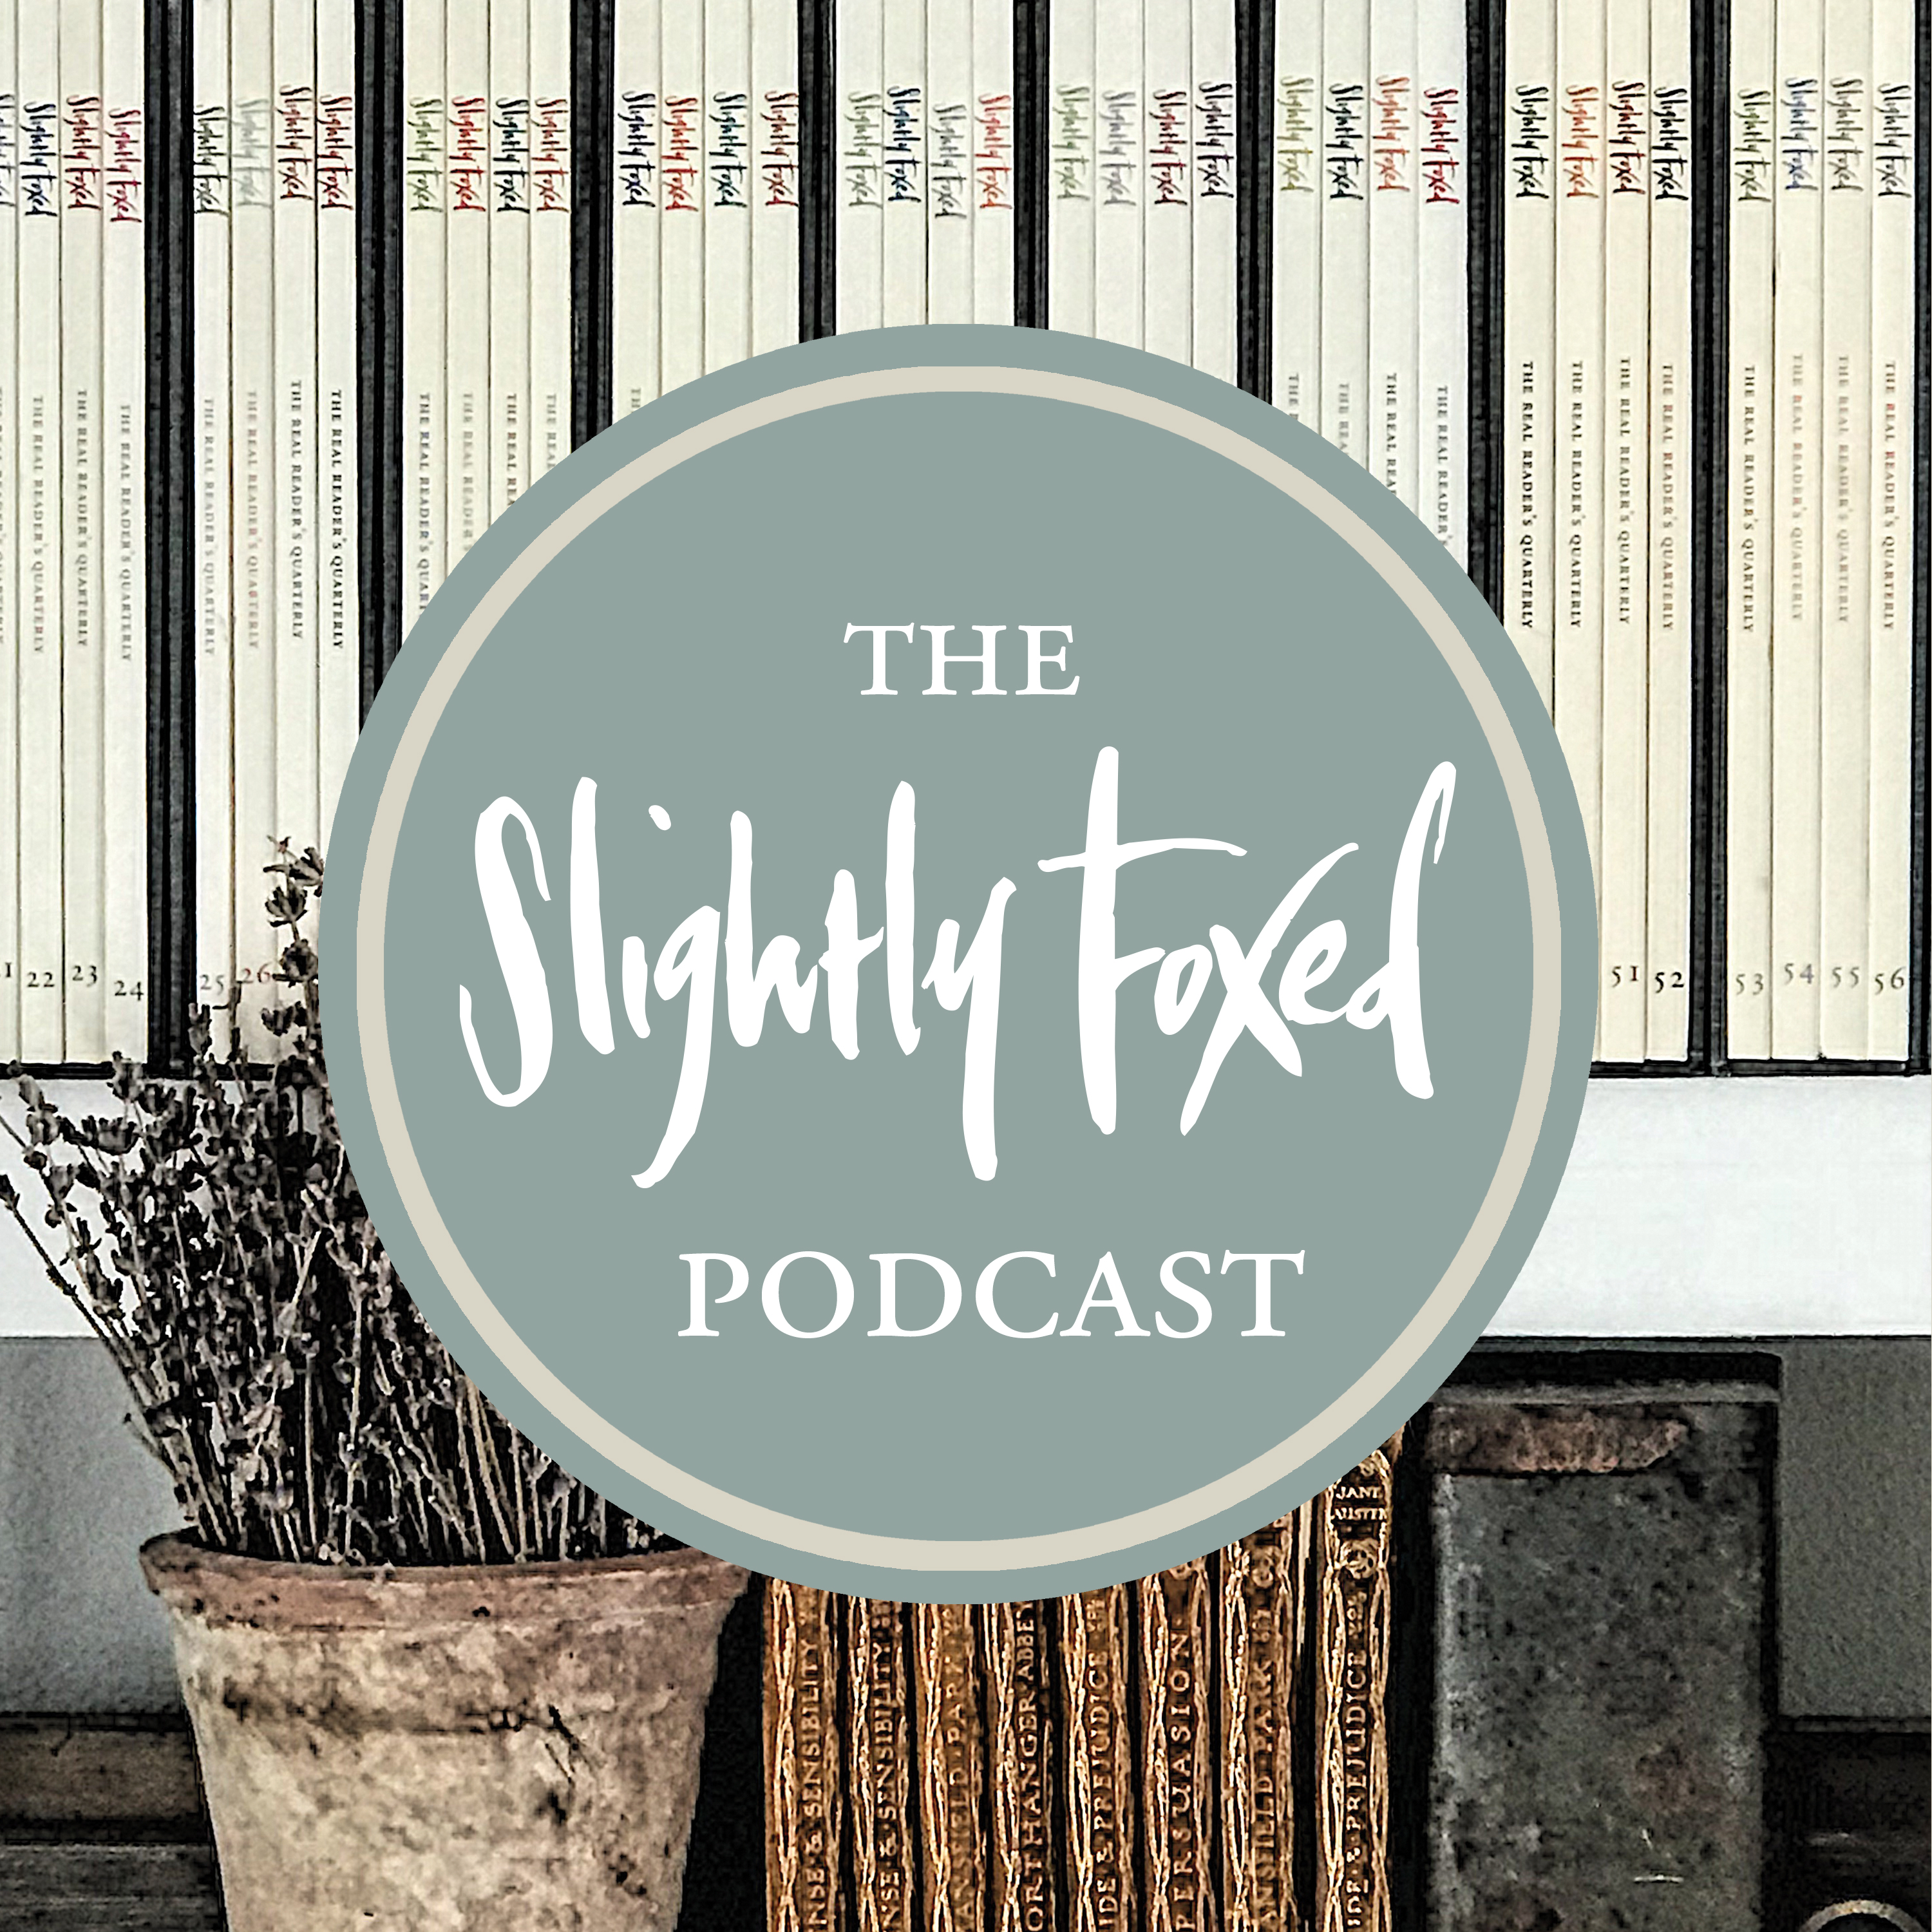 The Slightly Foxed Podcast